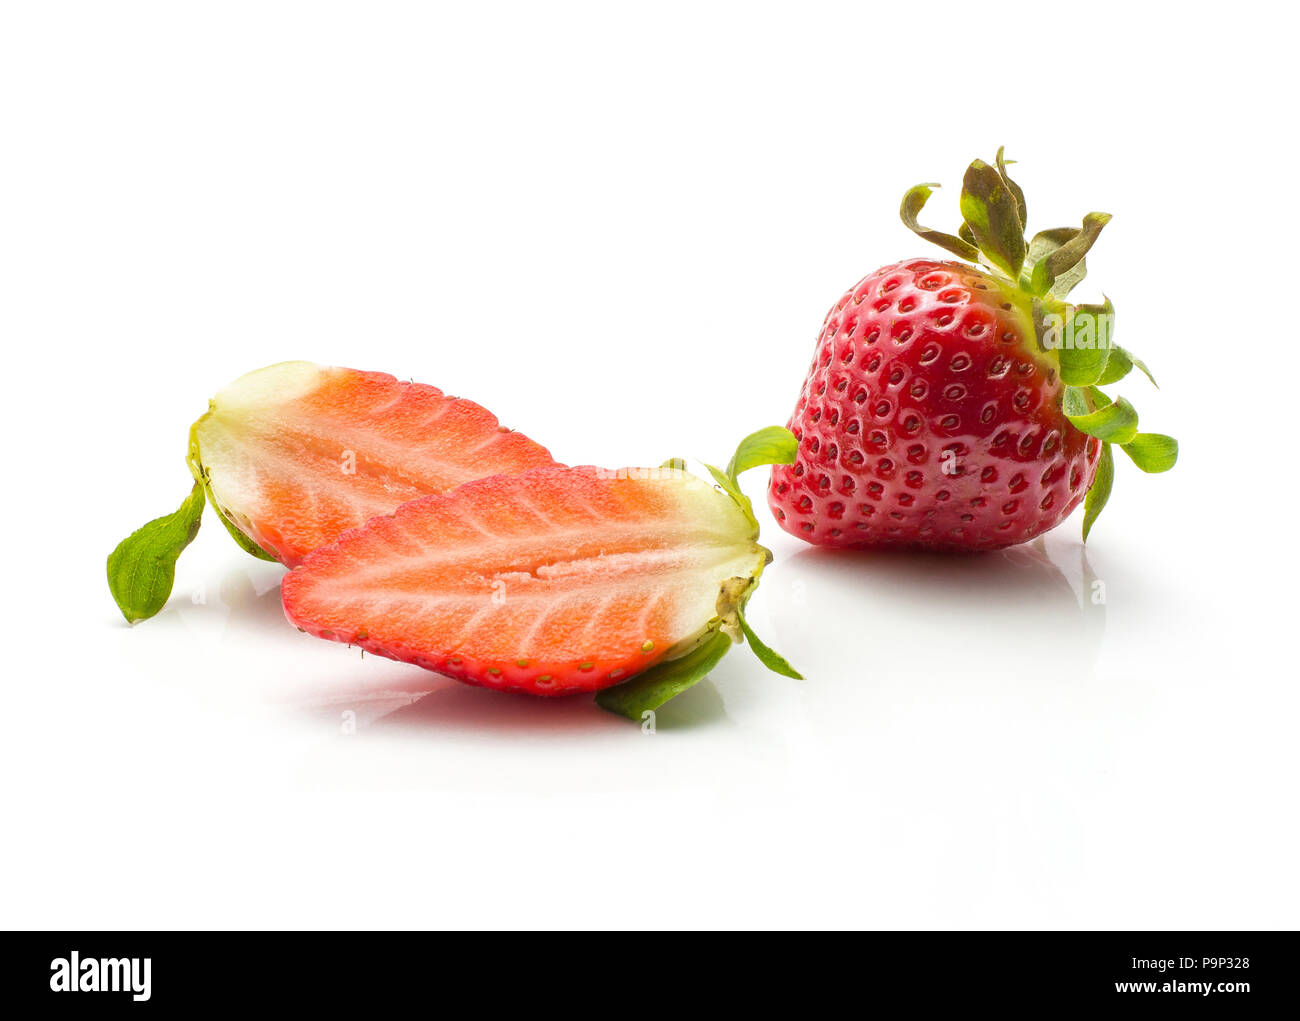 One garden strawberry and two halves isolated on white background Stock Photo